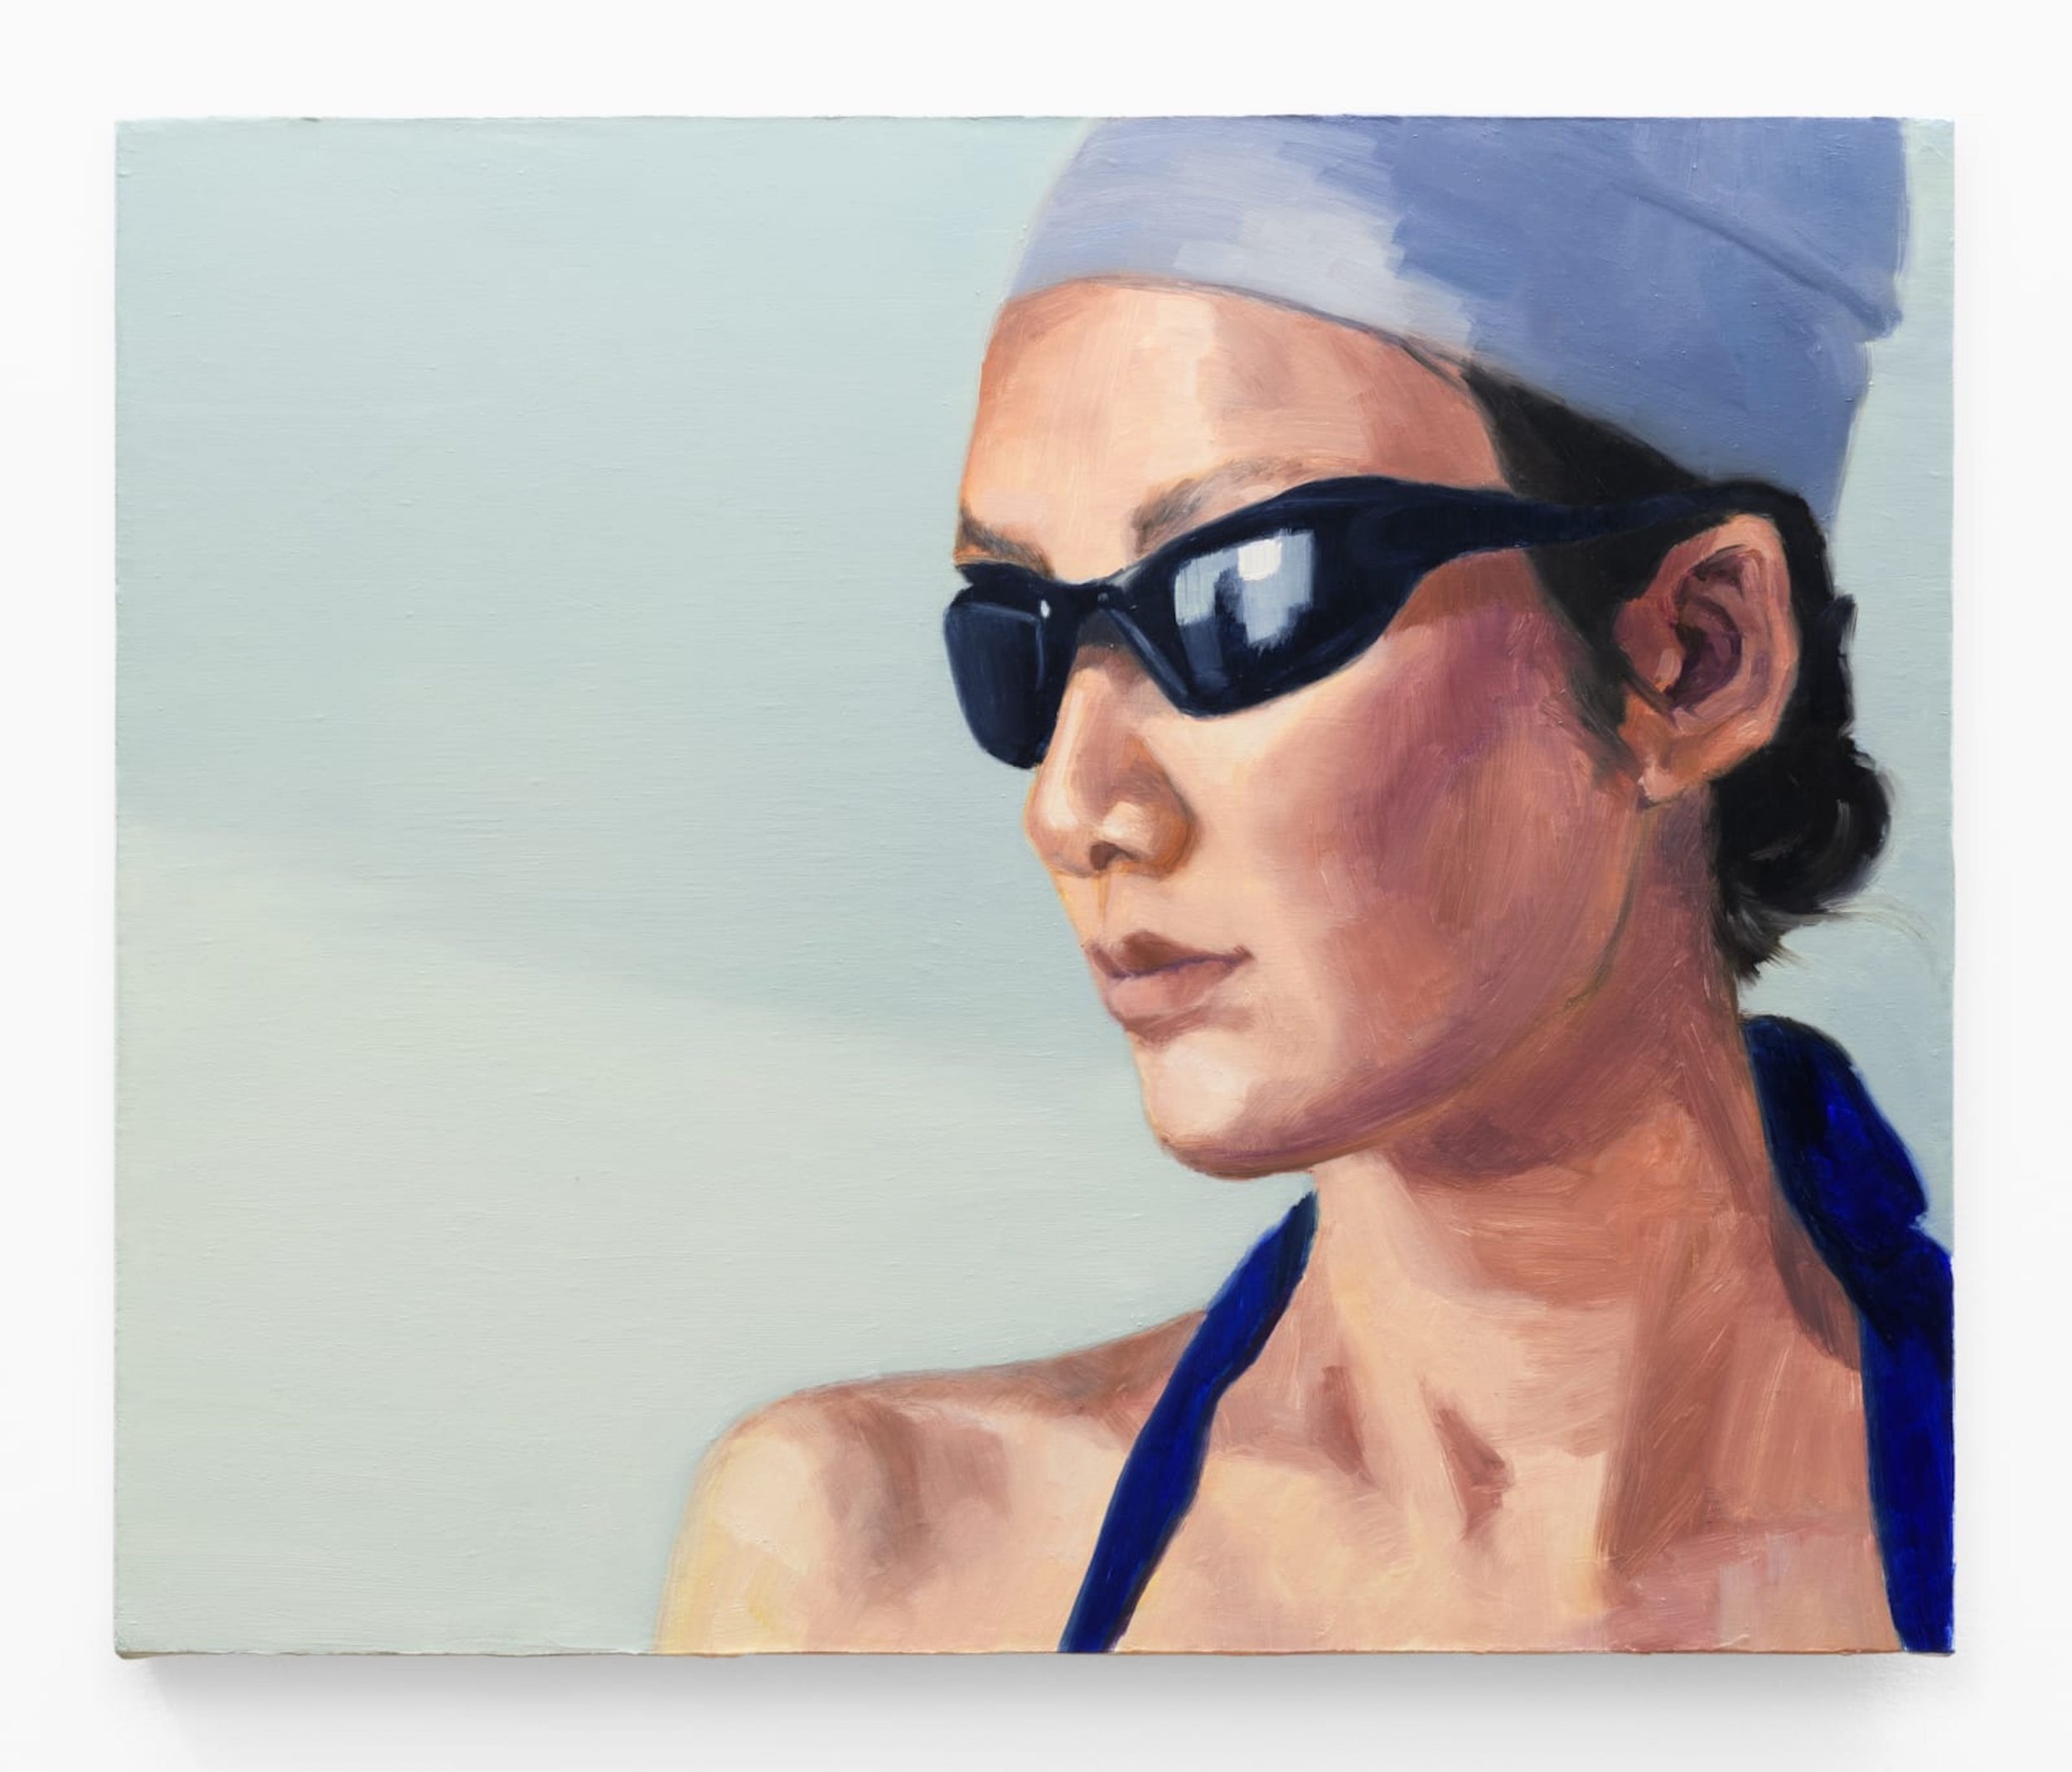  Yuri Yuan  Goggles , 2021 Oil on canvas 20 x 24 in (50.8 x 61 cm) Courtesy of the Artist and Make Room 